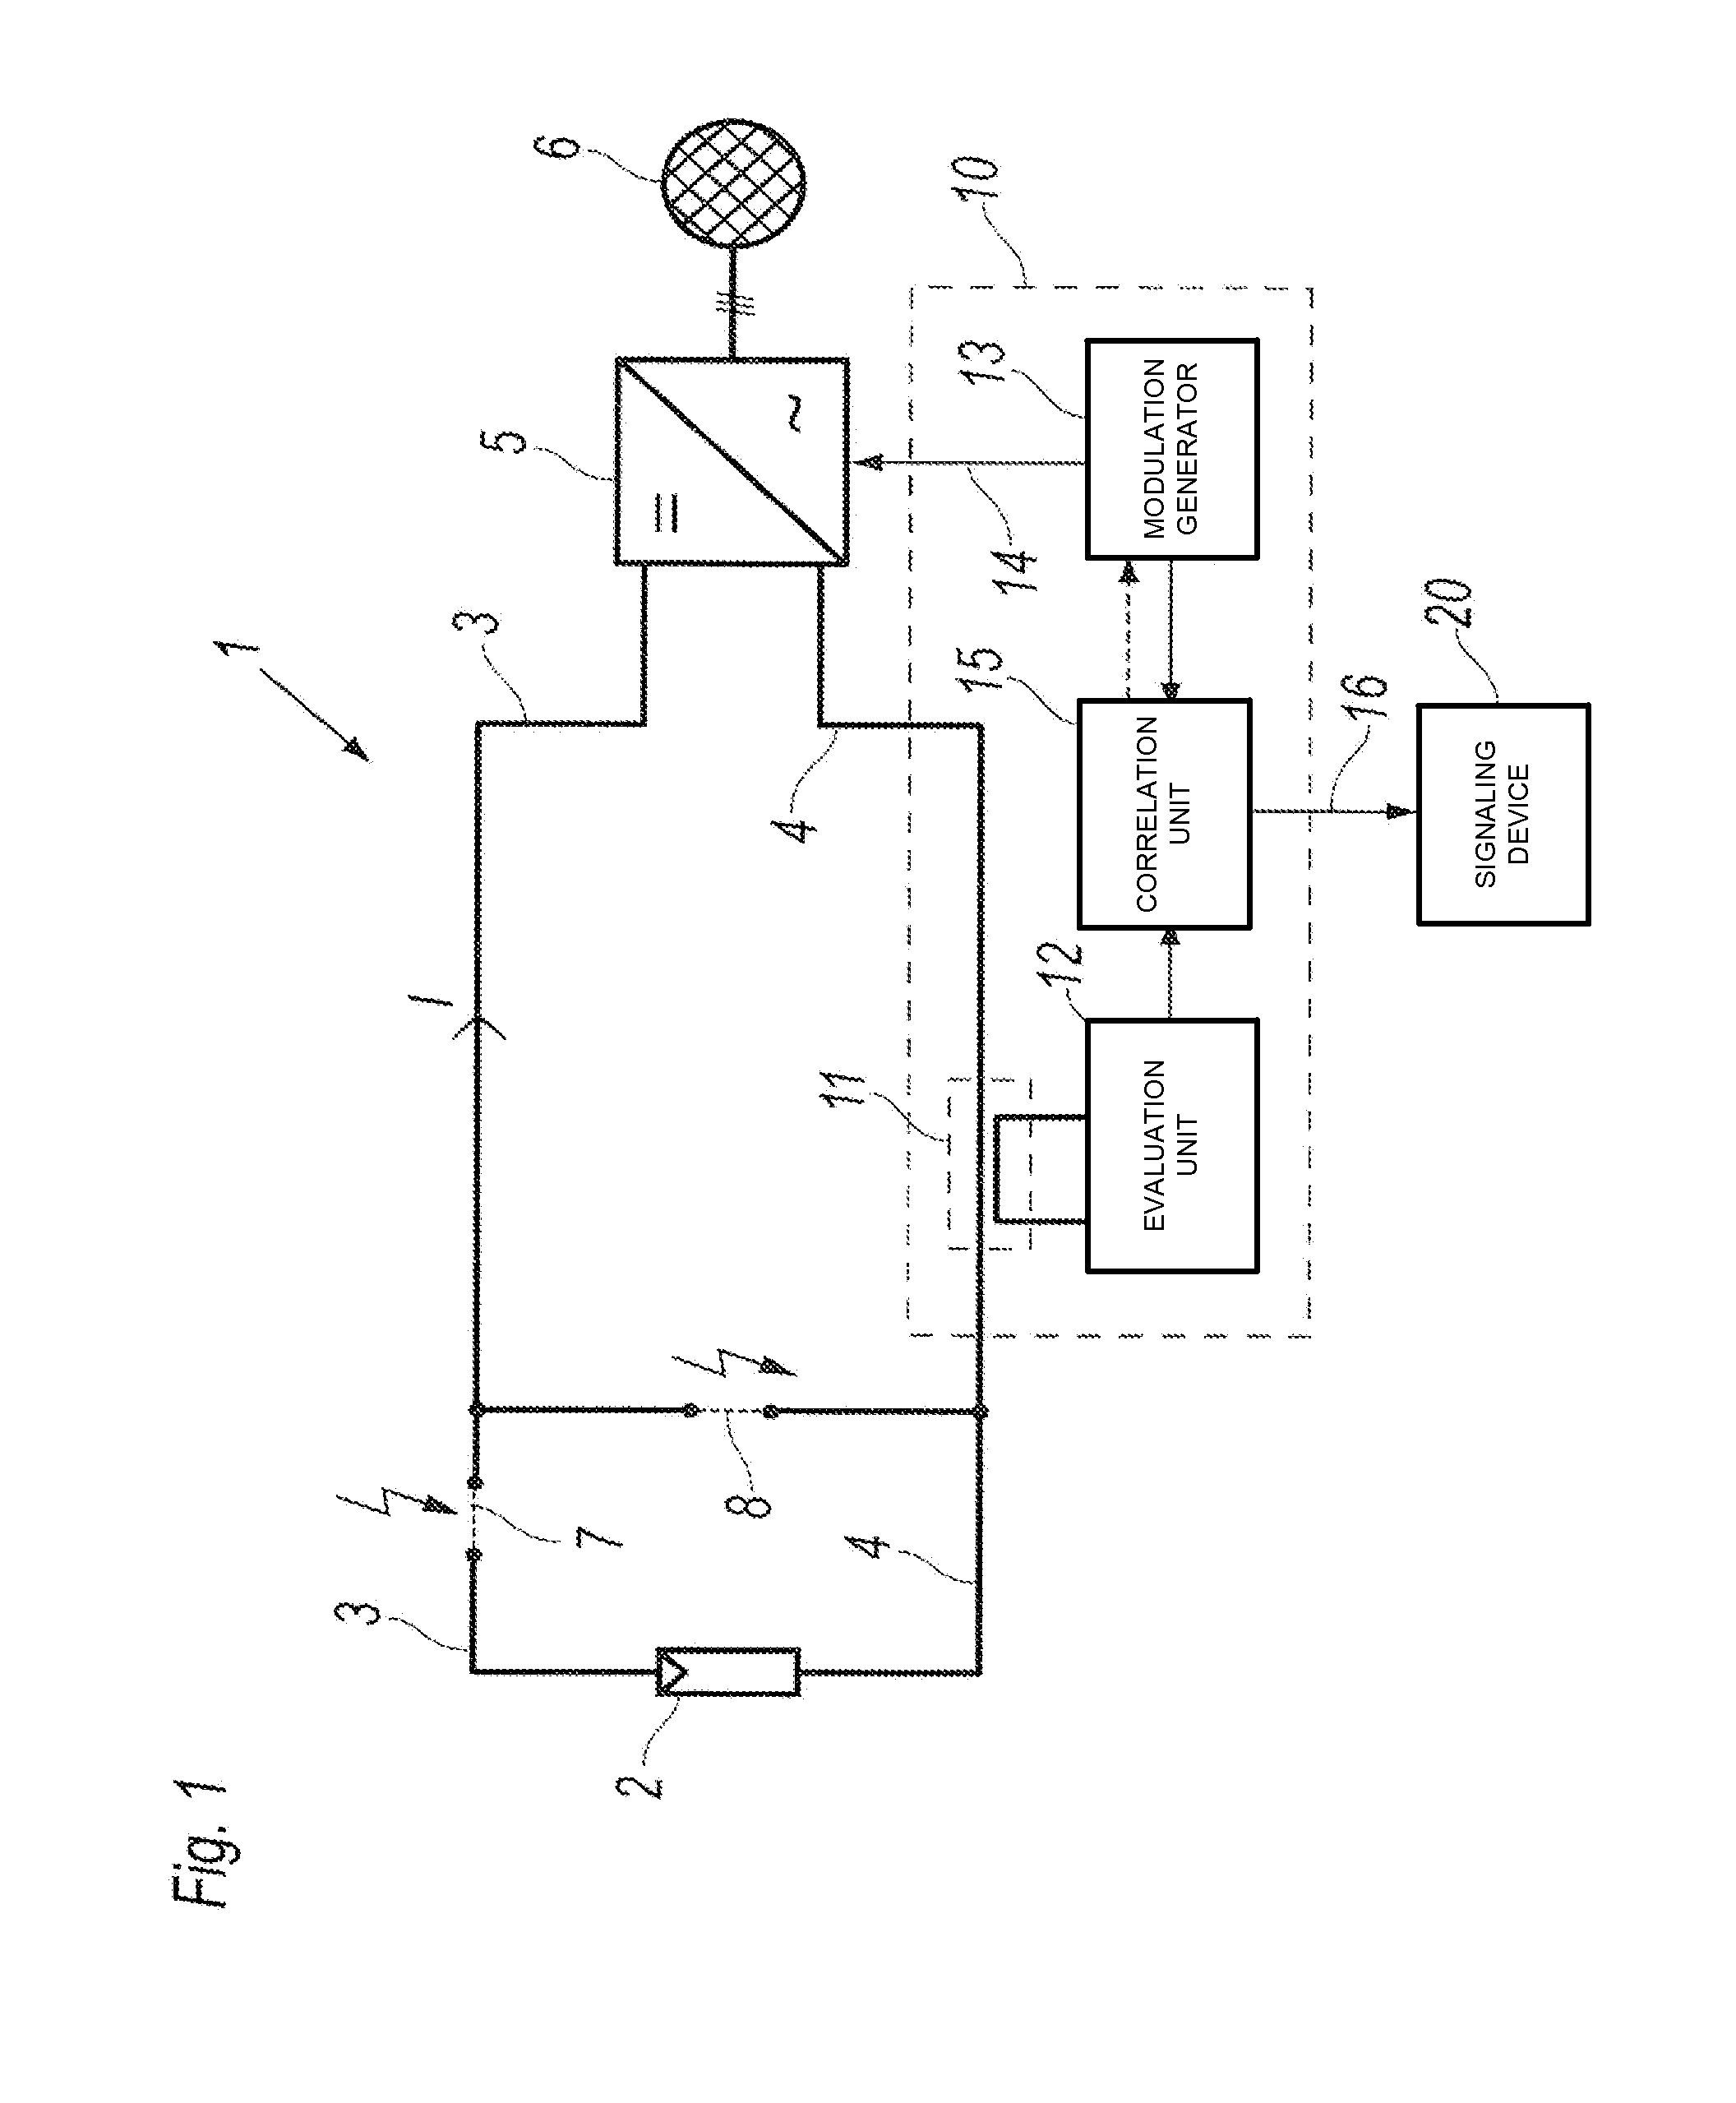 Method and apparatus for detecting an arc in a DC circuit